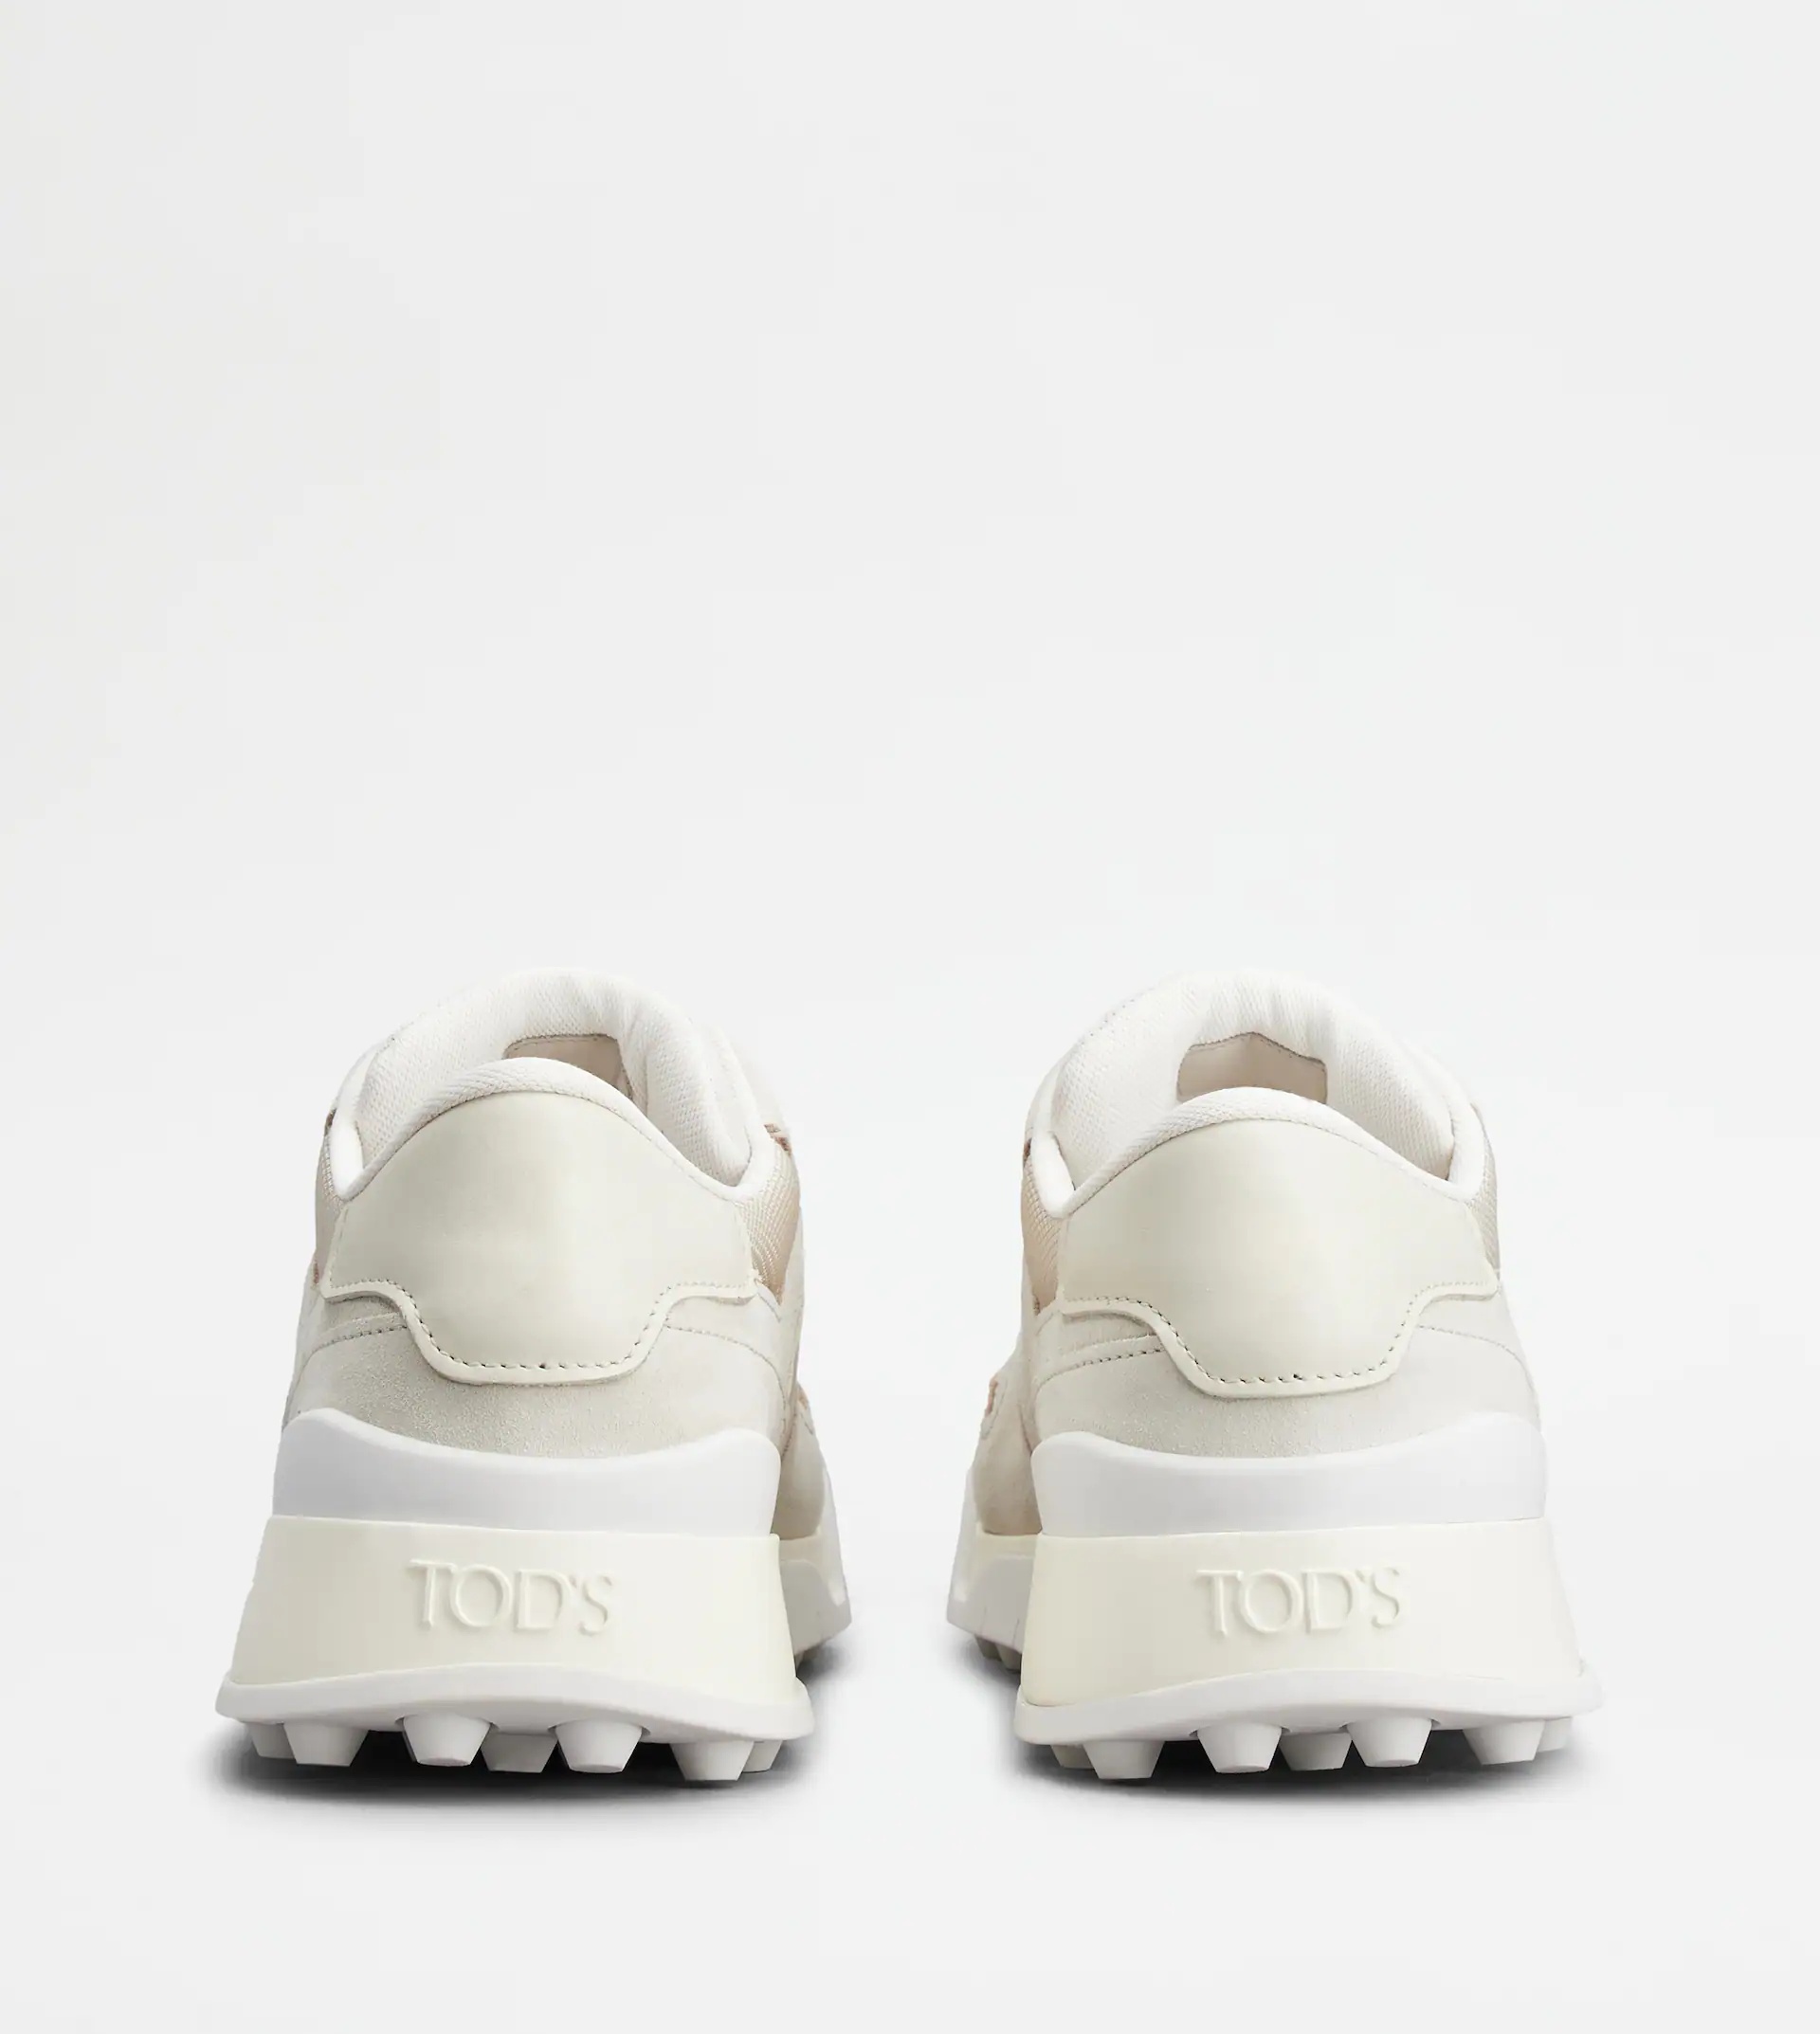 TOD'S SNEAKERS IN SUEDE AND SMOOTH LEATHER - OFF WHITE, BEIGE, WHITE - 3